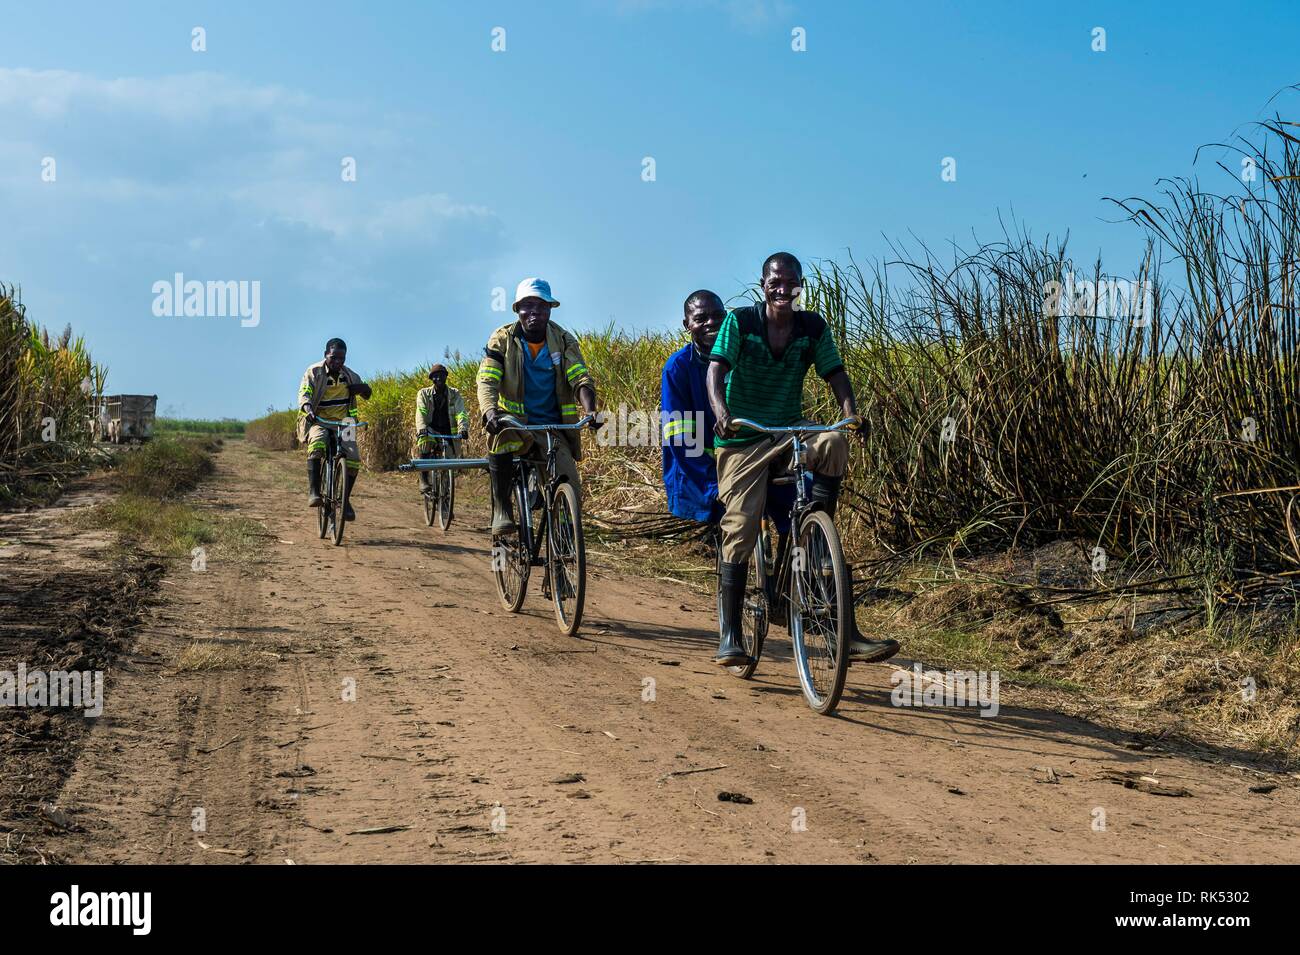 Sugar cane cutters on their way to work cycling through the sugar cane fields, Nchalo, Malawi, Africa Stock Photo